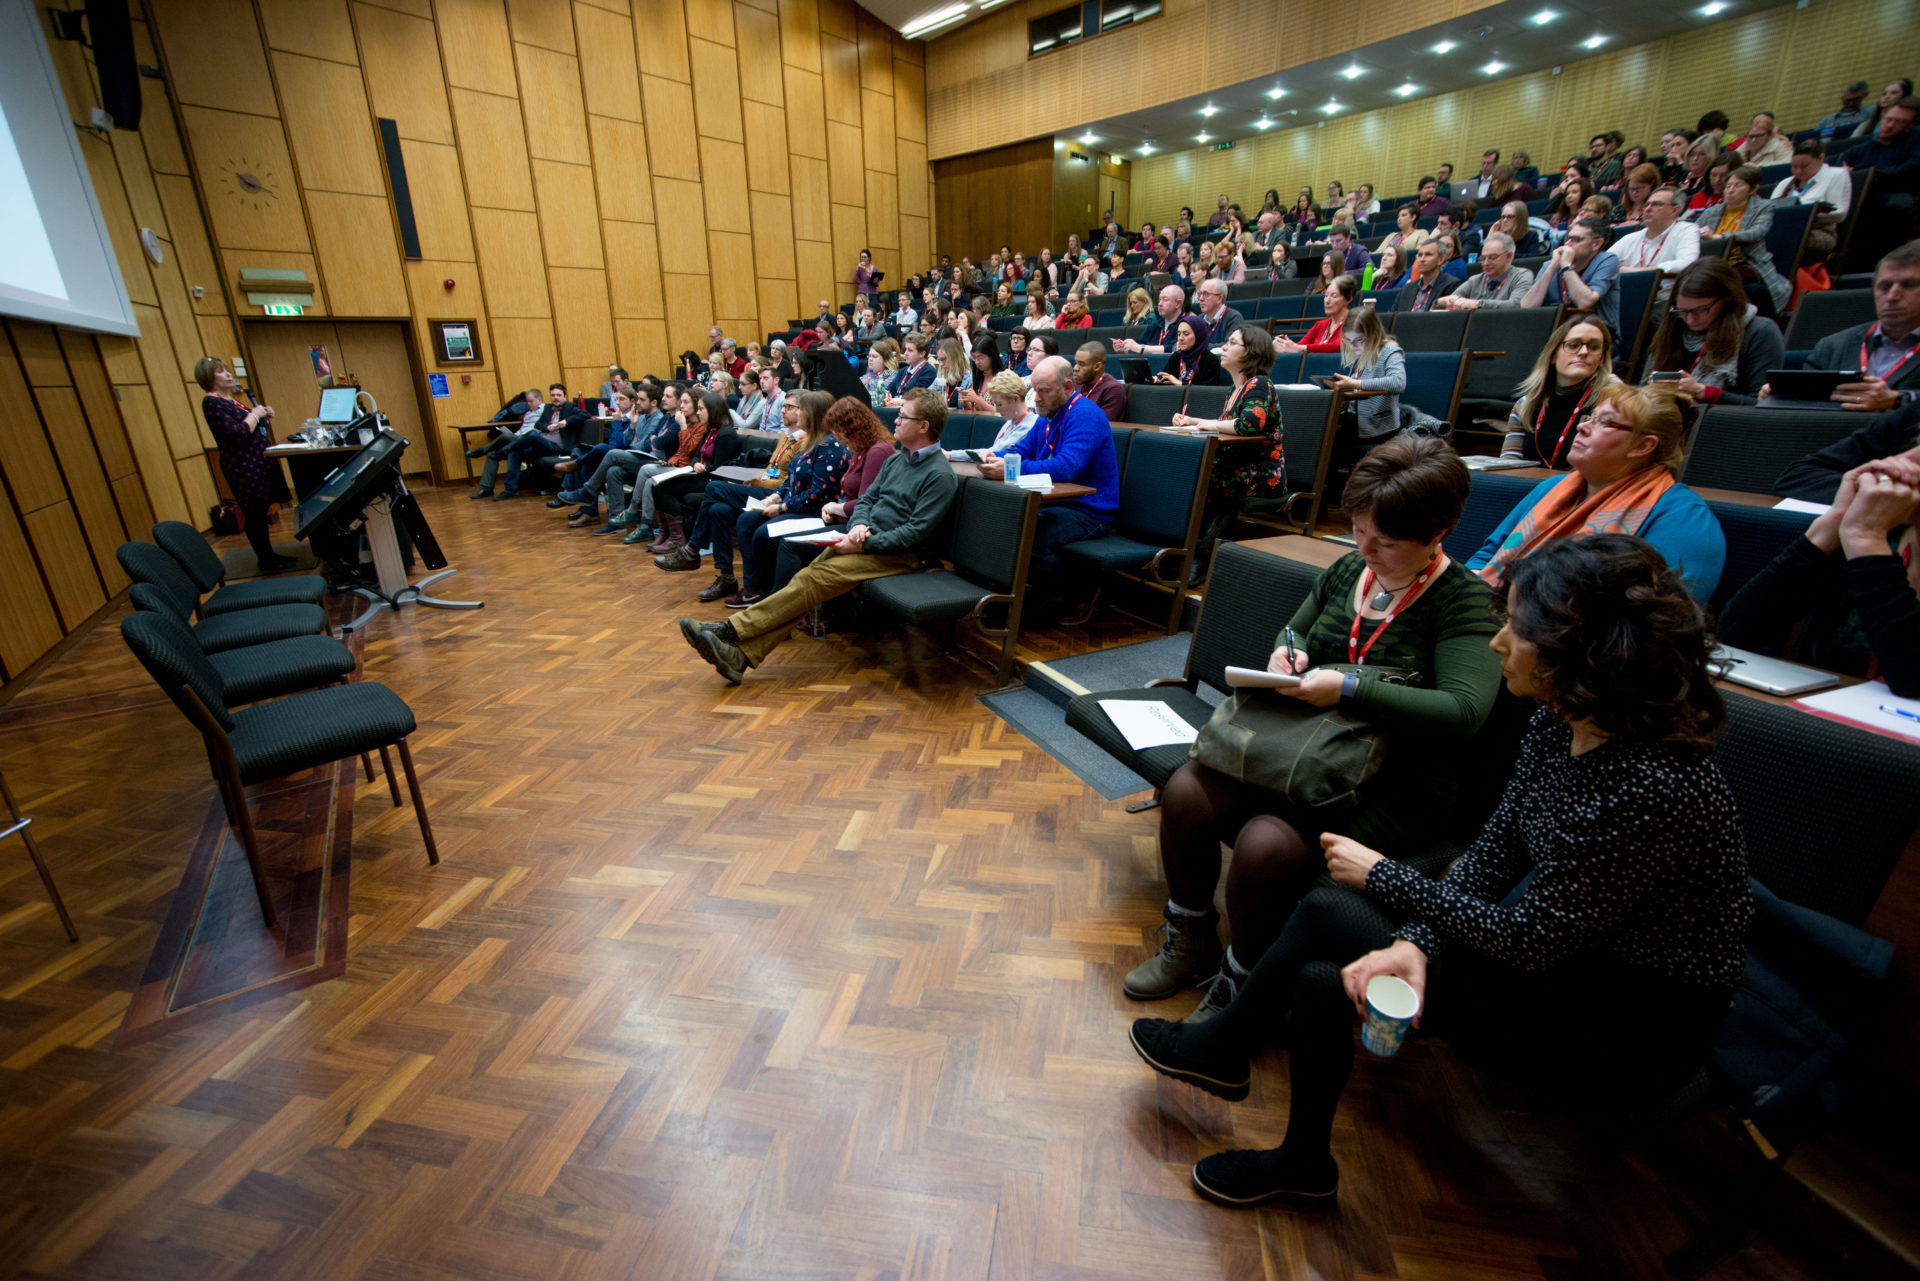 Speaker and delegates in a lecture theatre from the student education conference